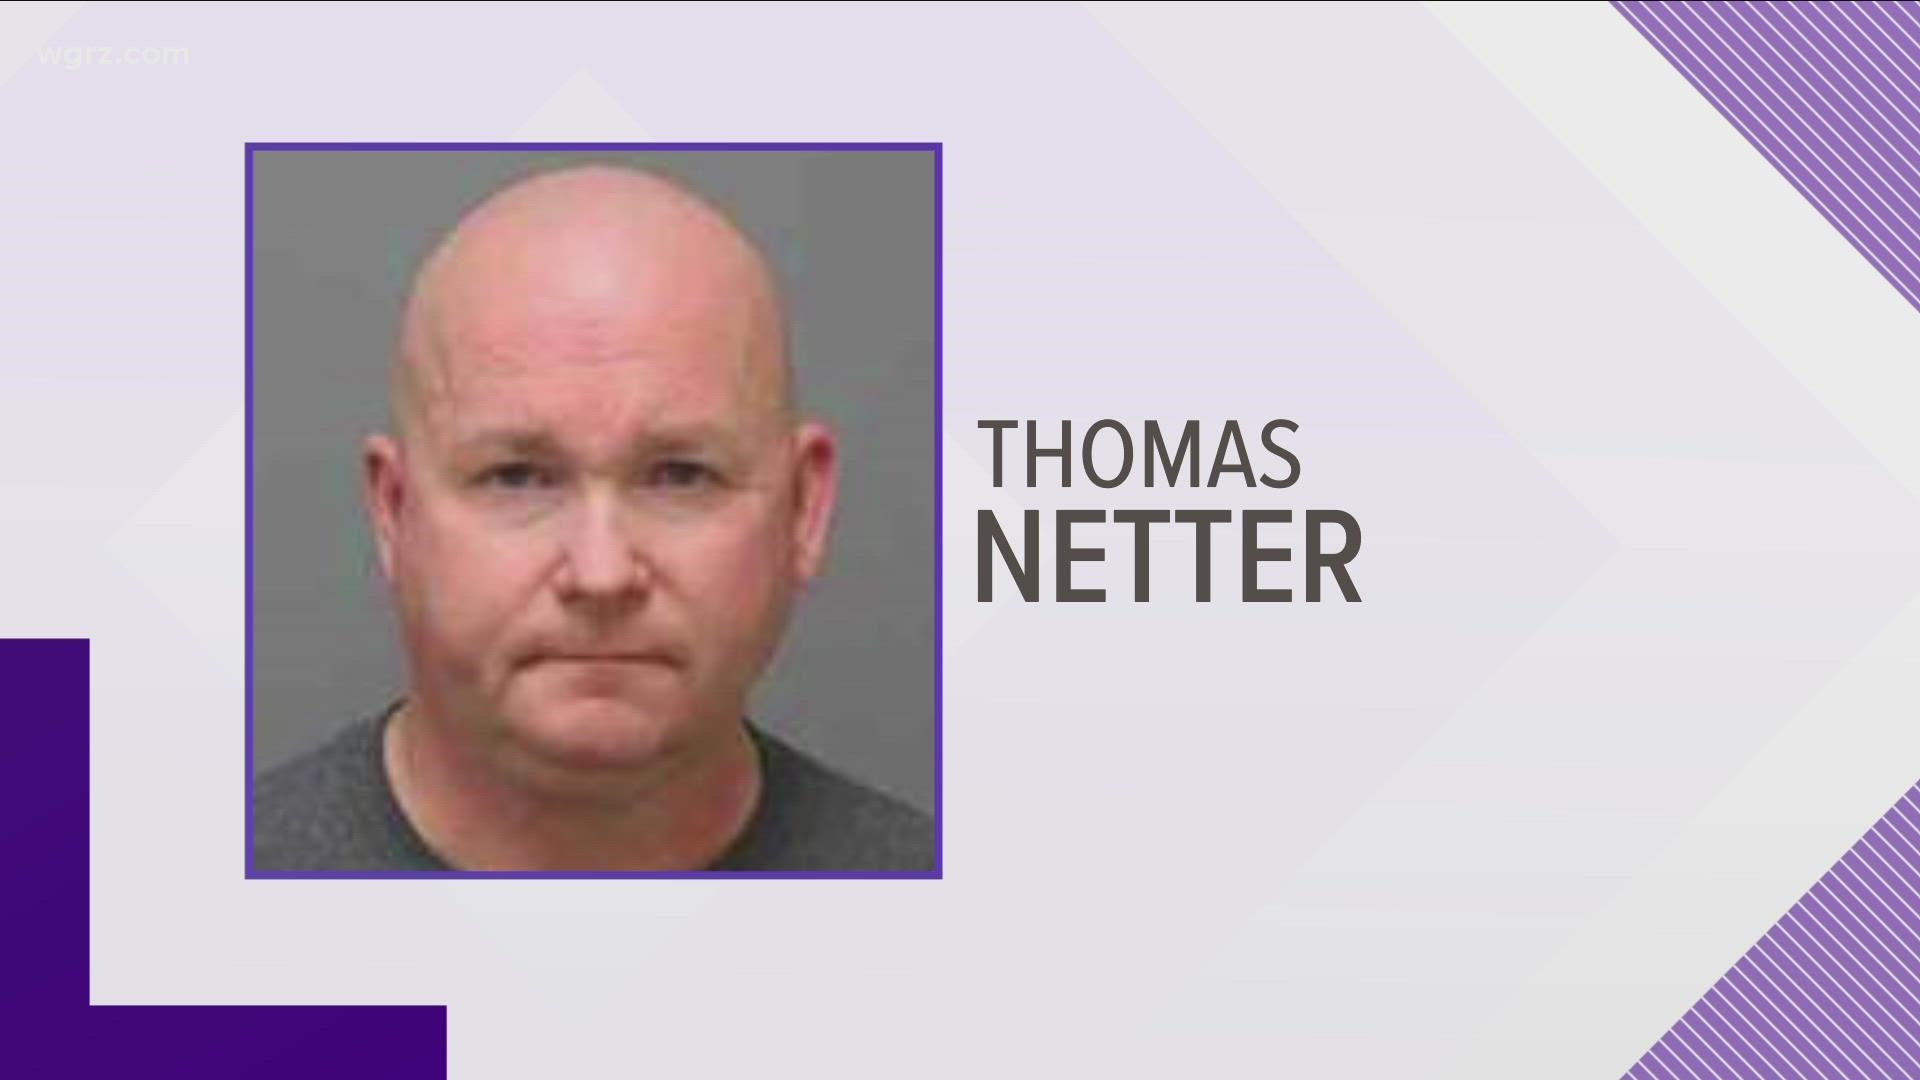 Netter is accused of sending a threatening message to Poloncarz on facebook messenger back in January...